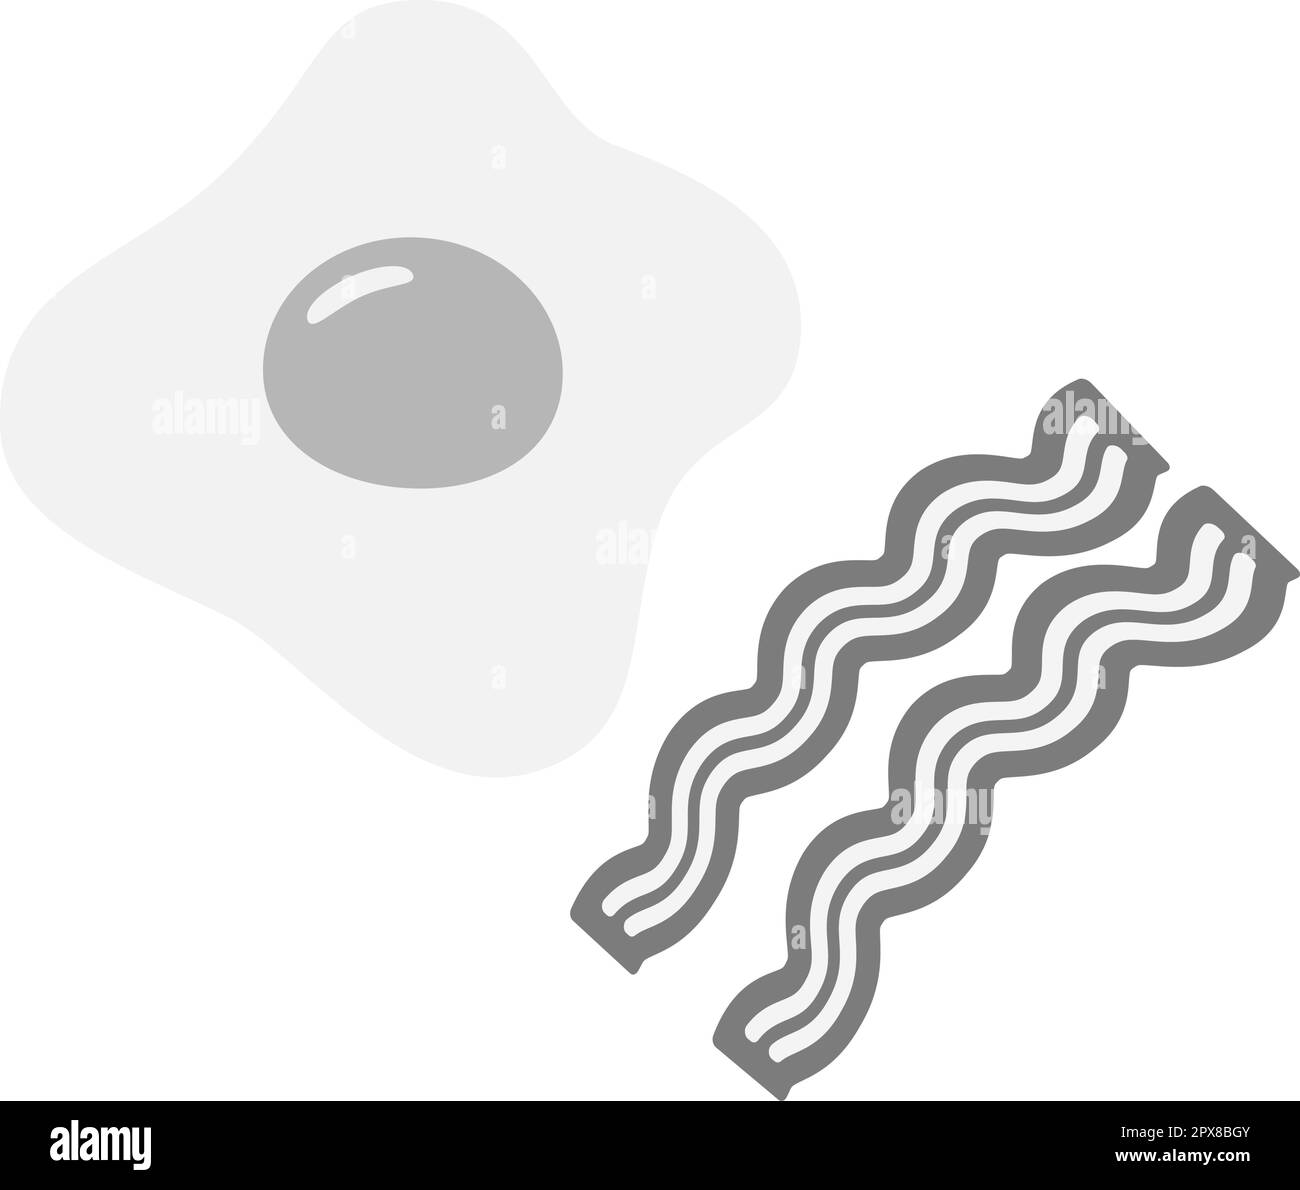 eggs and bacon clipart black and white